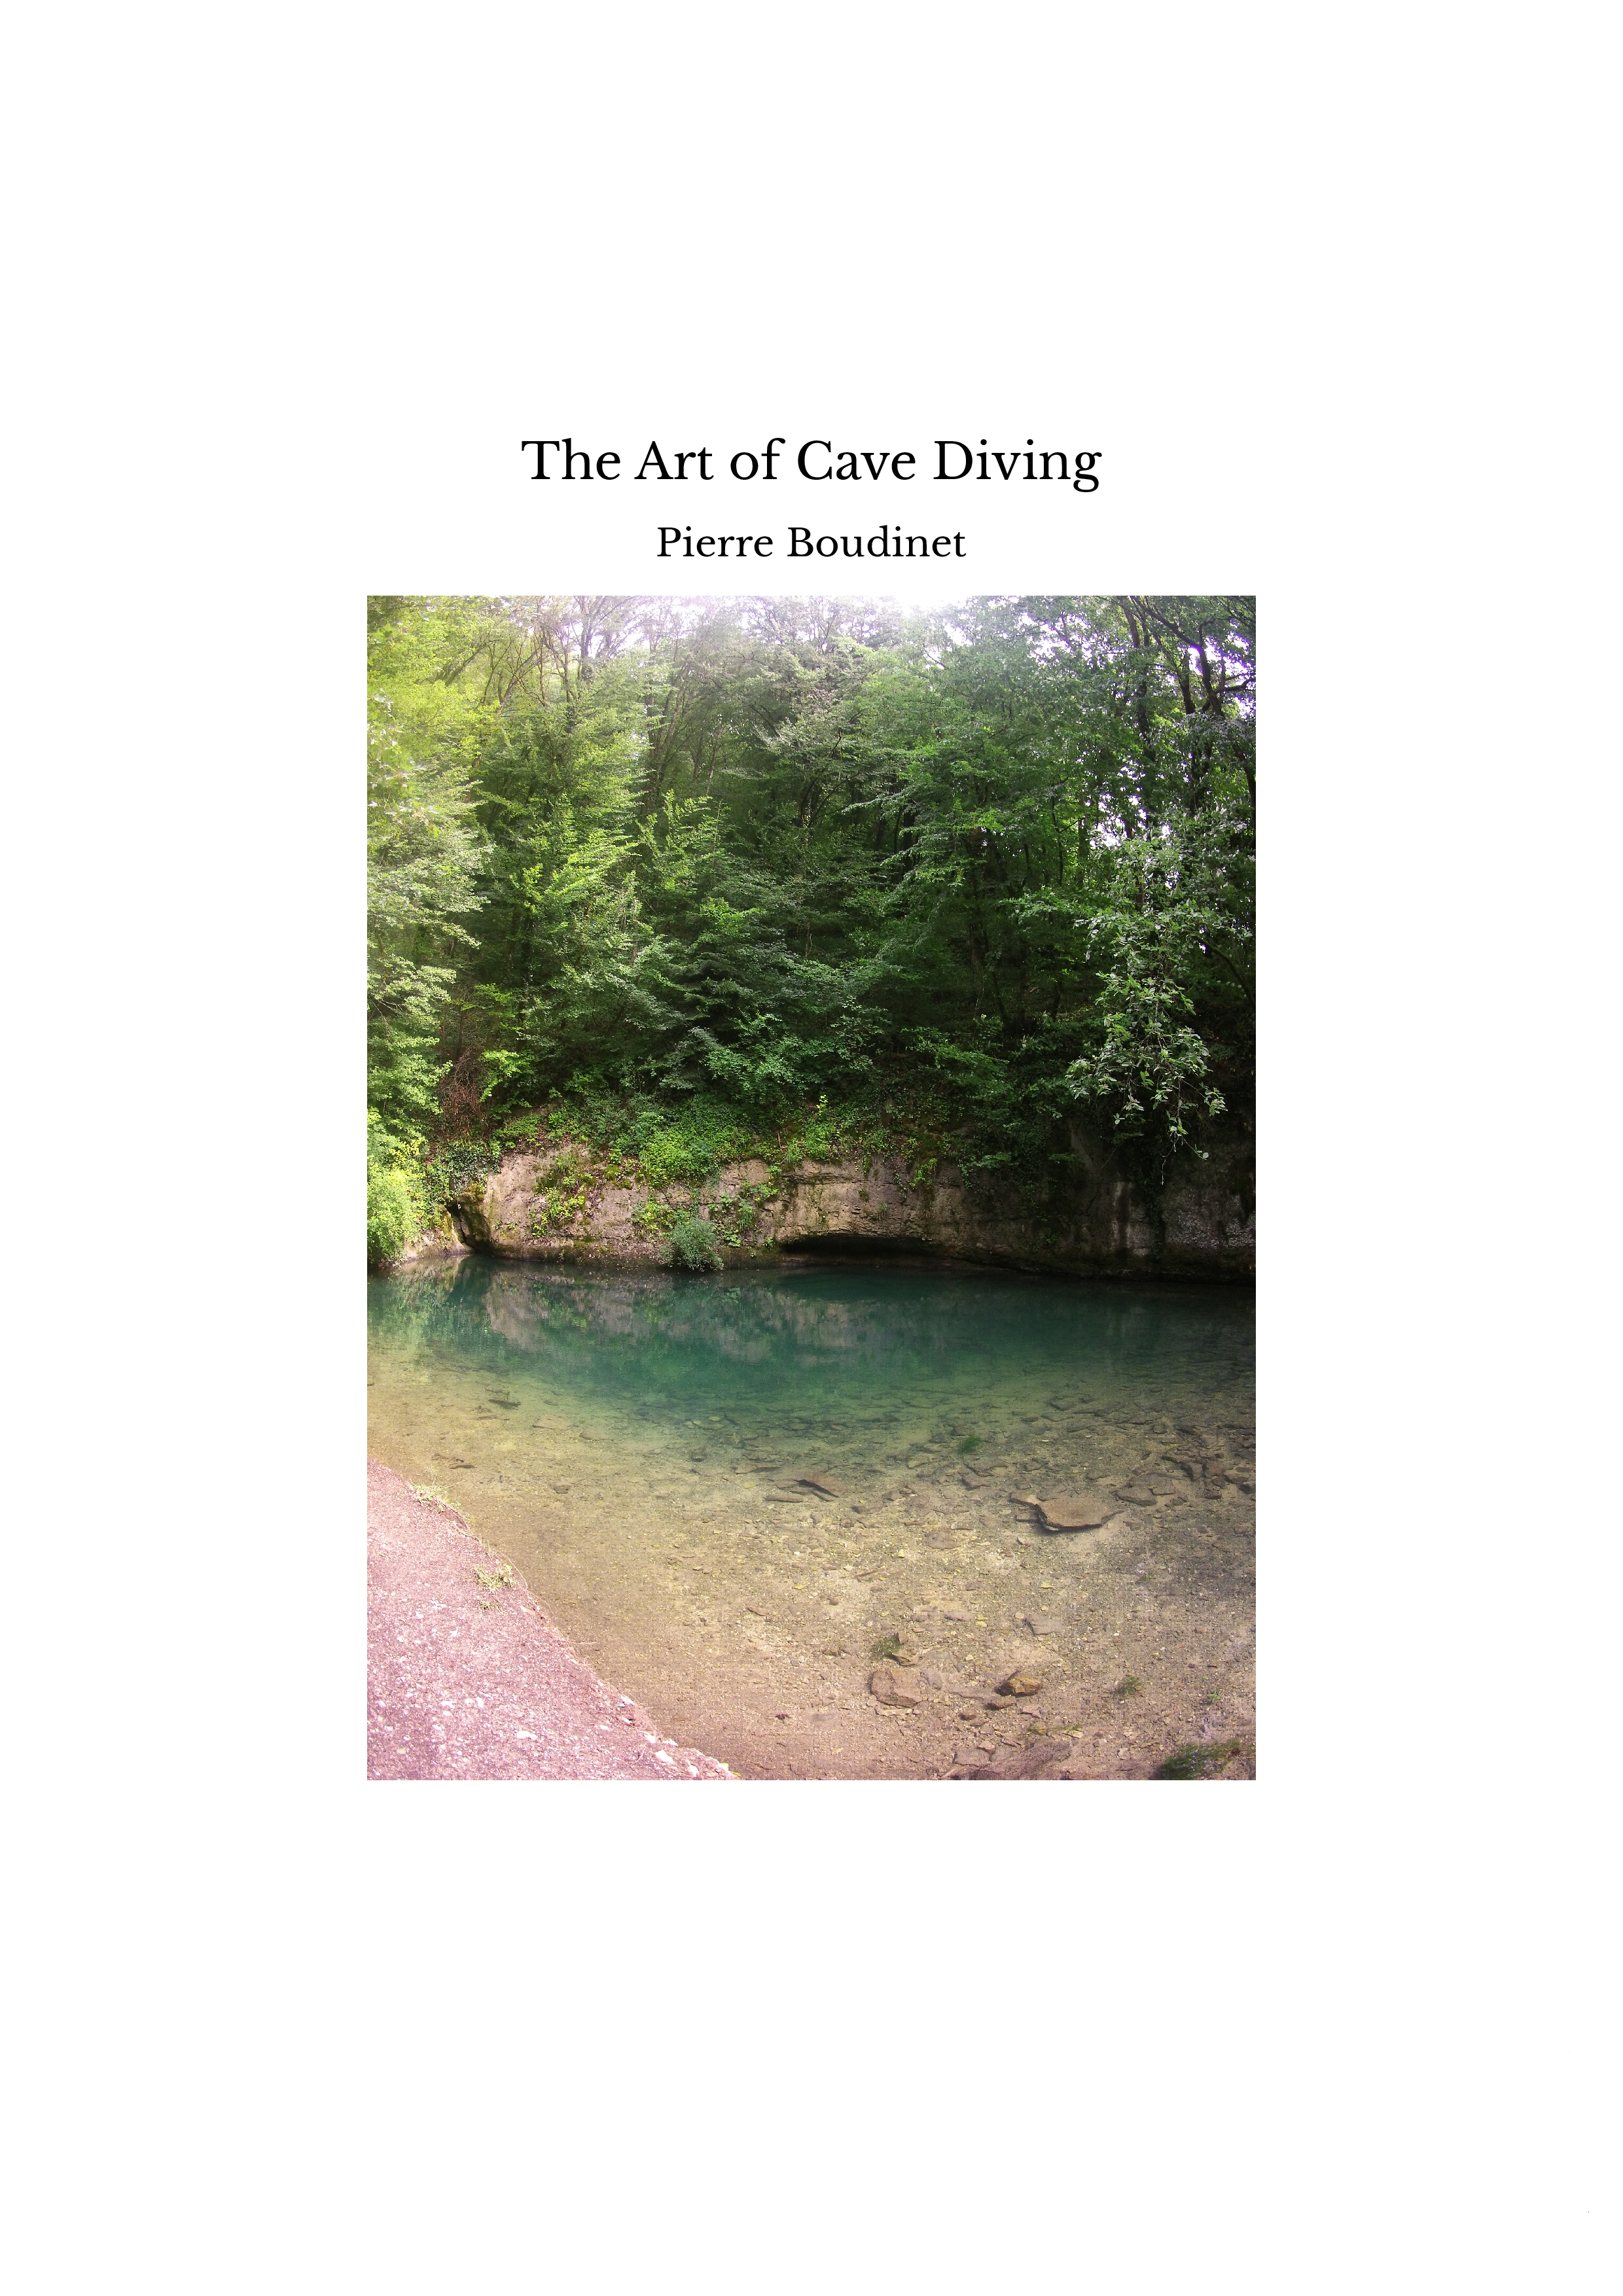 The Art of Cave Diving